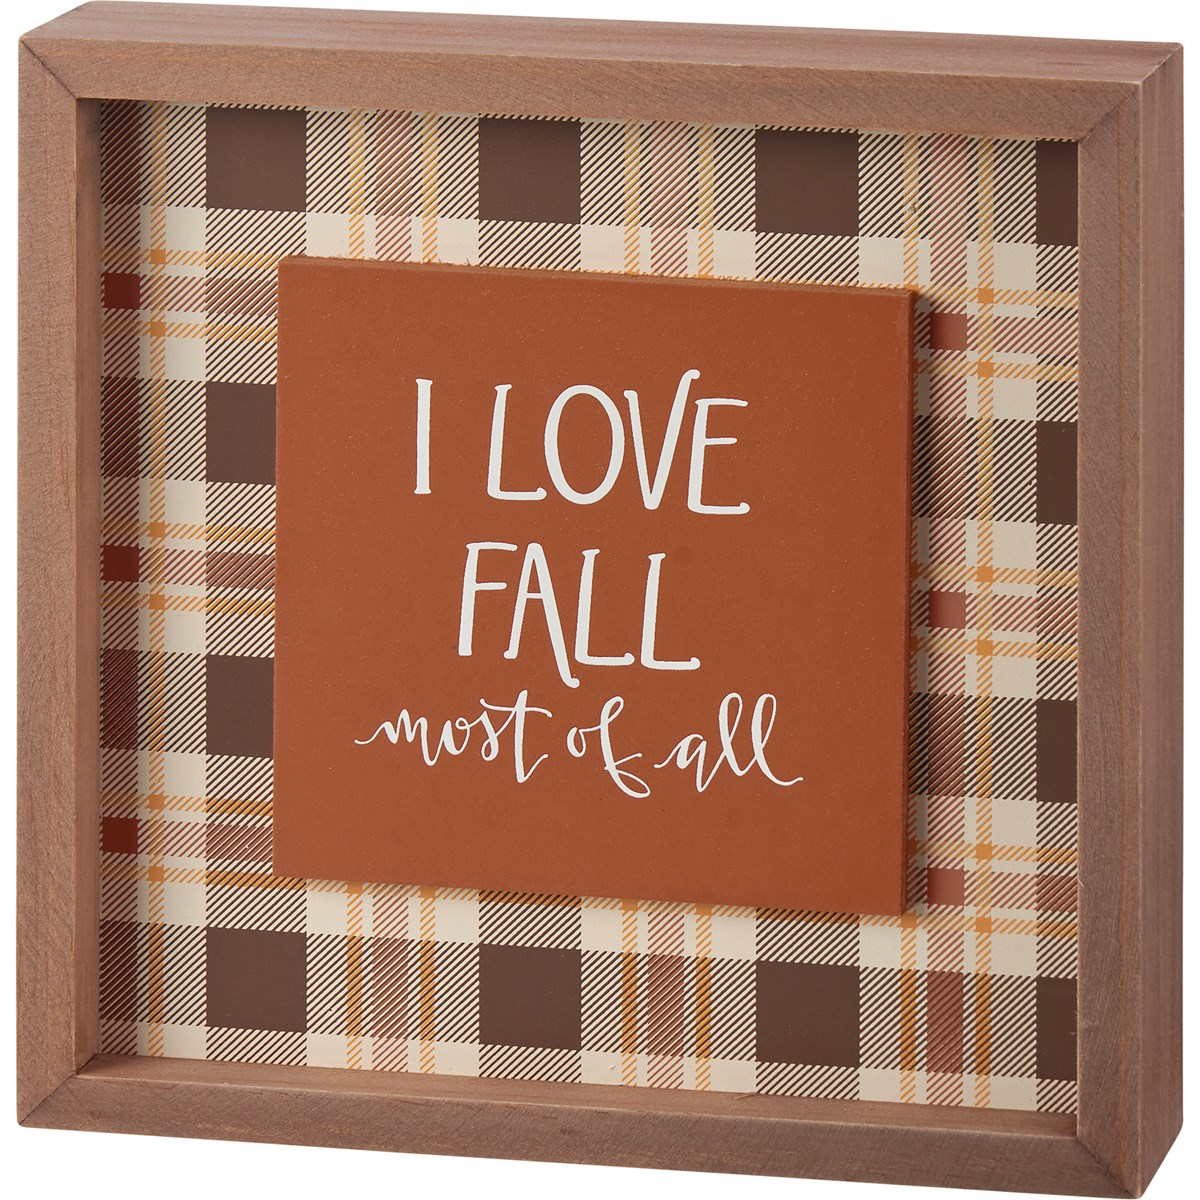 Inset Box Sign - I Love Fall Most Of All - 8" x 8" x 1.75" - Wood